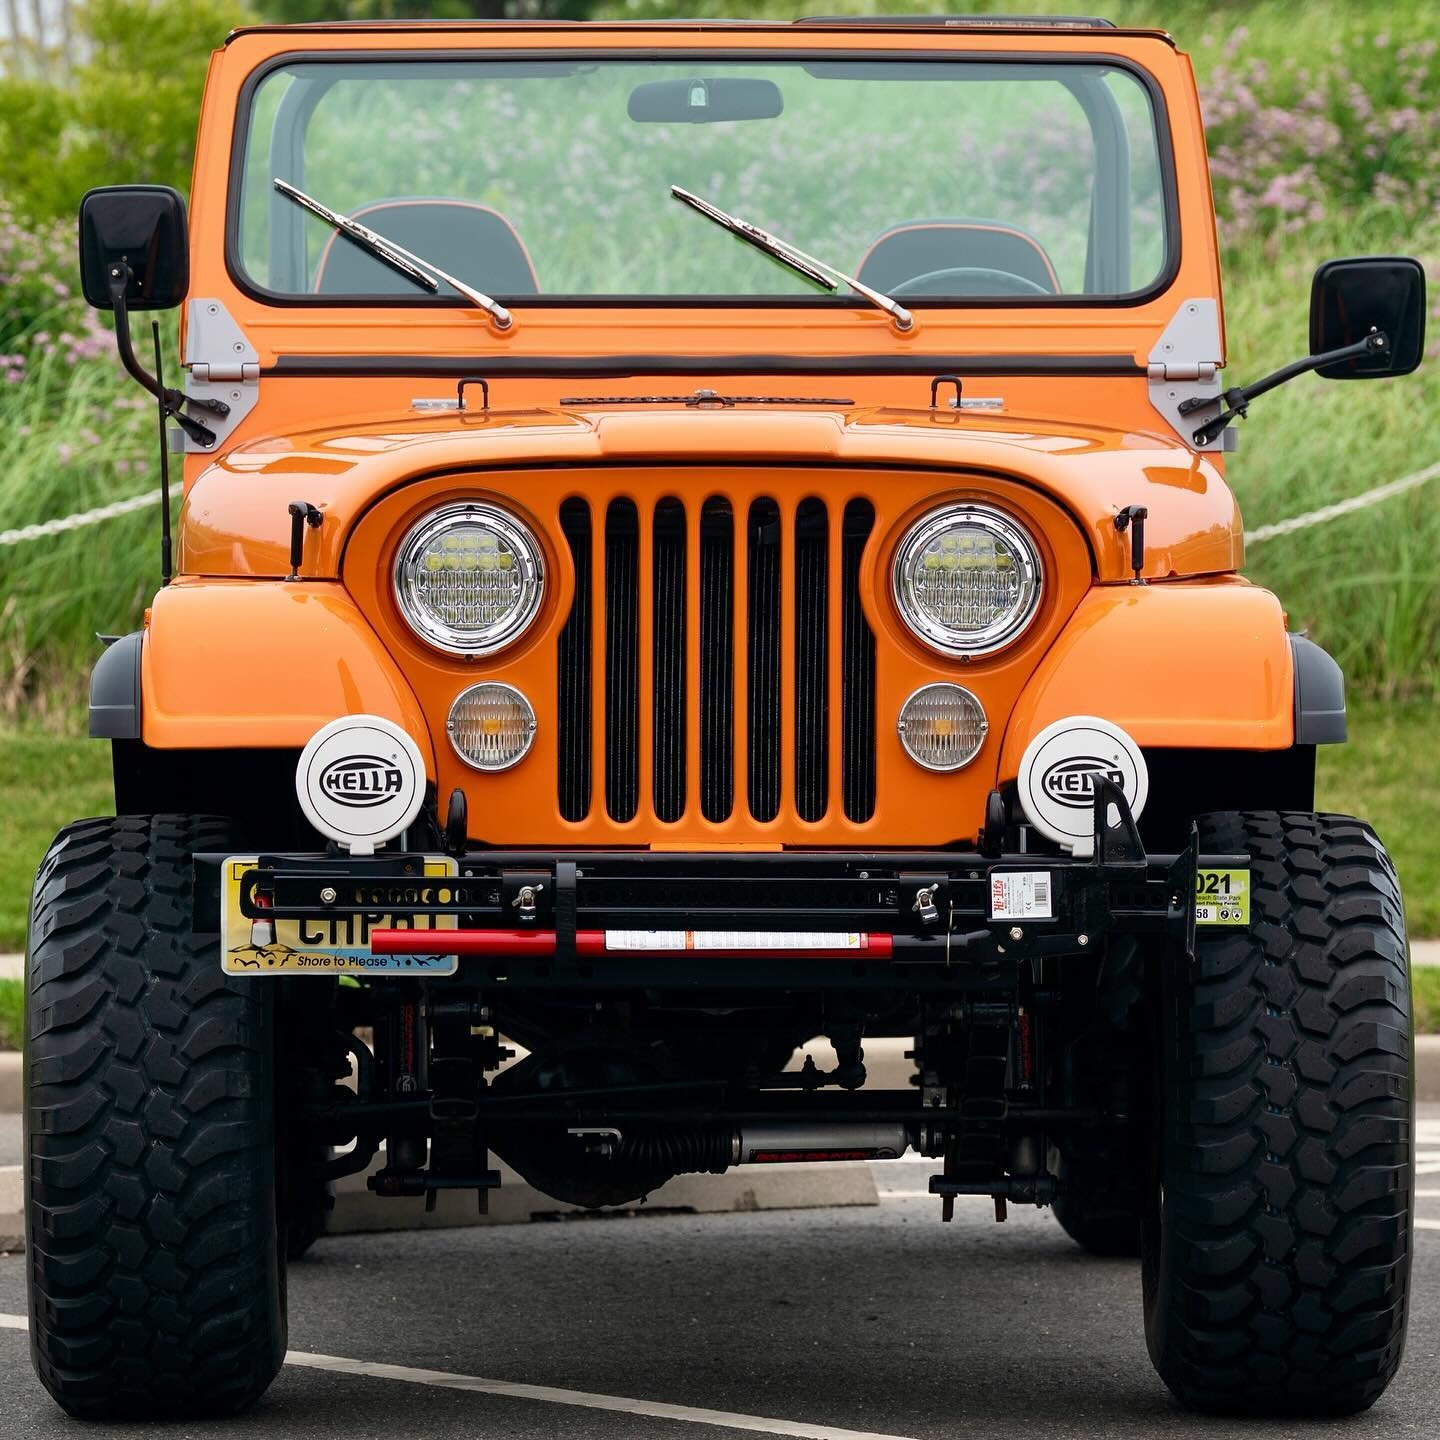 Front End Friday!  1981 Jeep CJ7 in Omaha Orange!🍊

Fun Facts: I added this Jeep to my personal collection almost 15 years ago.  It ignited my passion for classic trucks and 4x4s that eventually lead to a much larger classic truck collection and lau